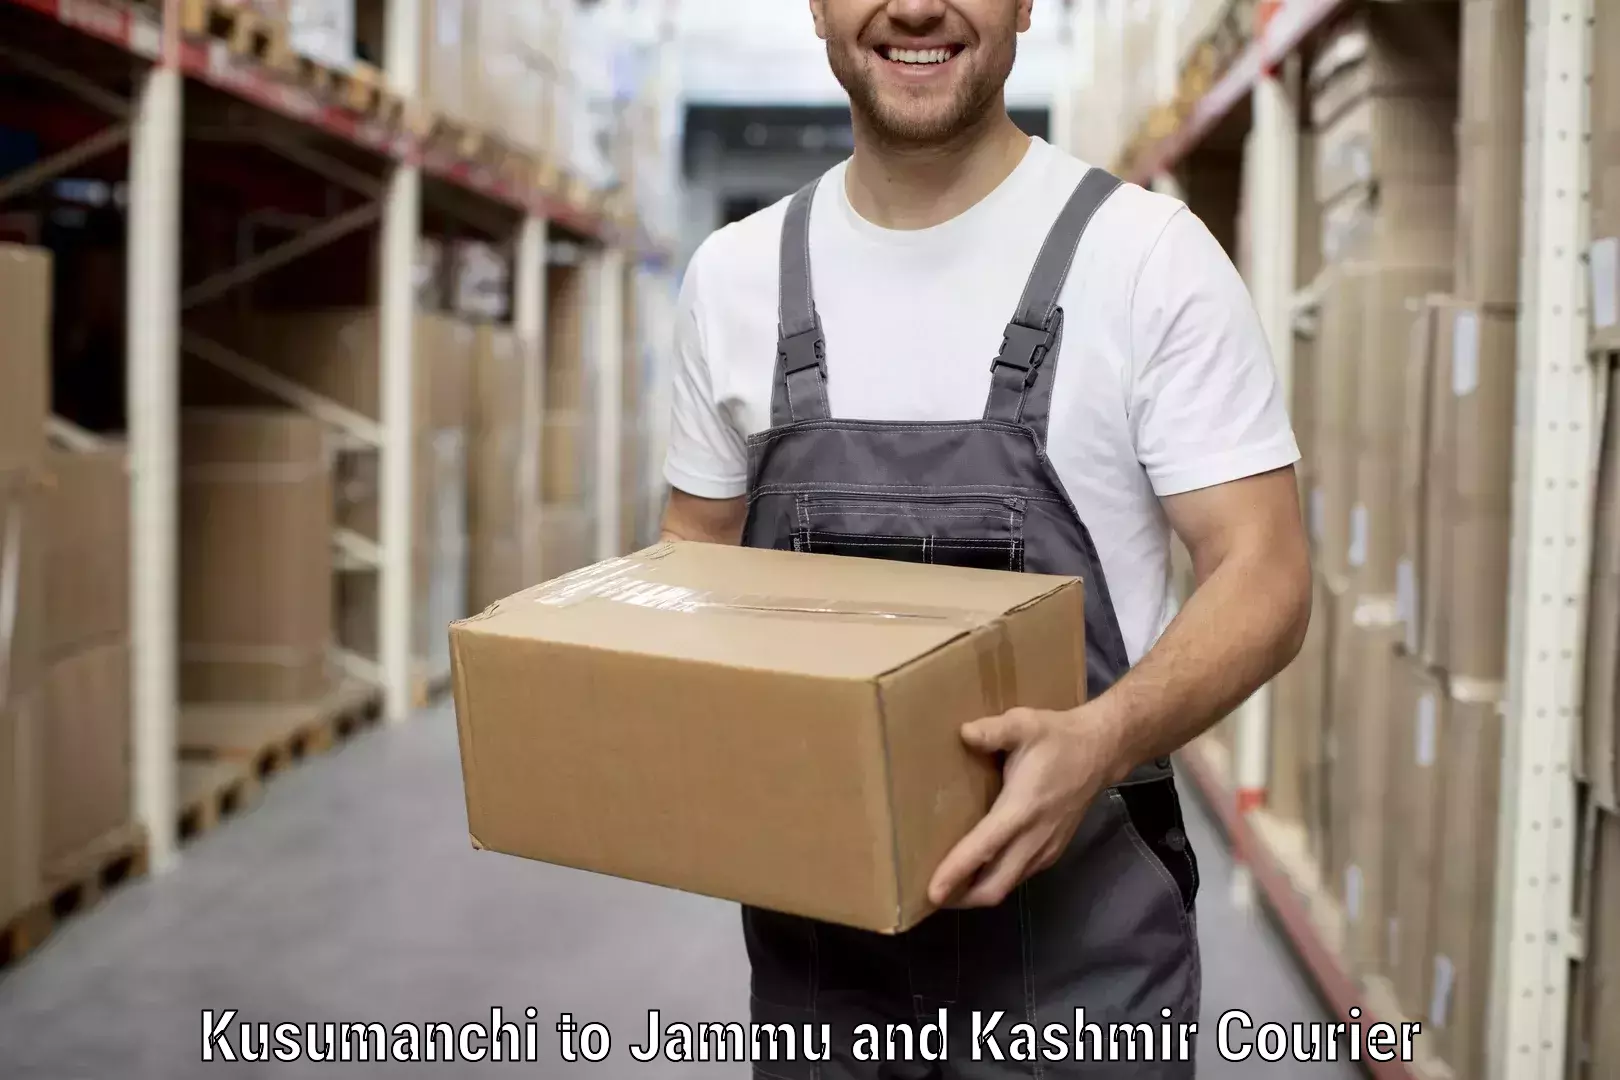 Professional movers and packers Kusumanchi to Sopore